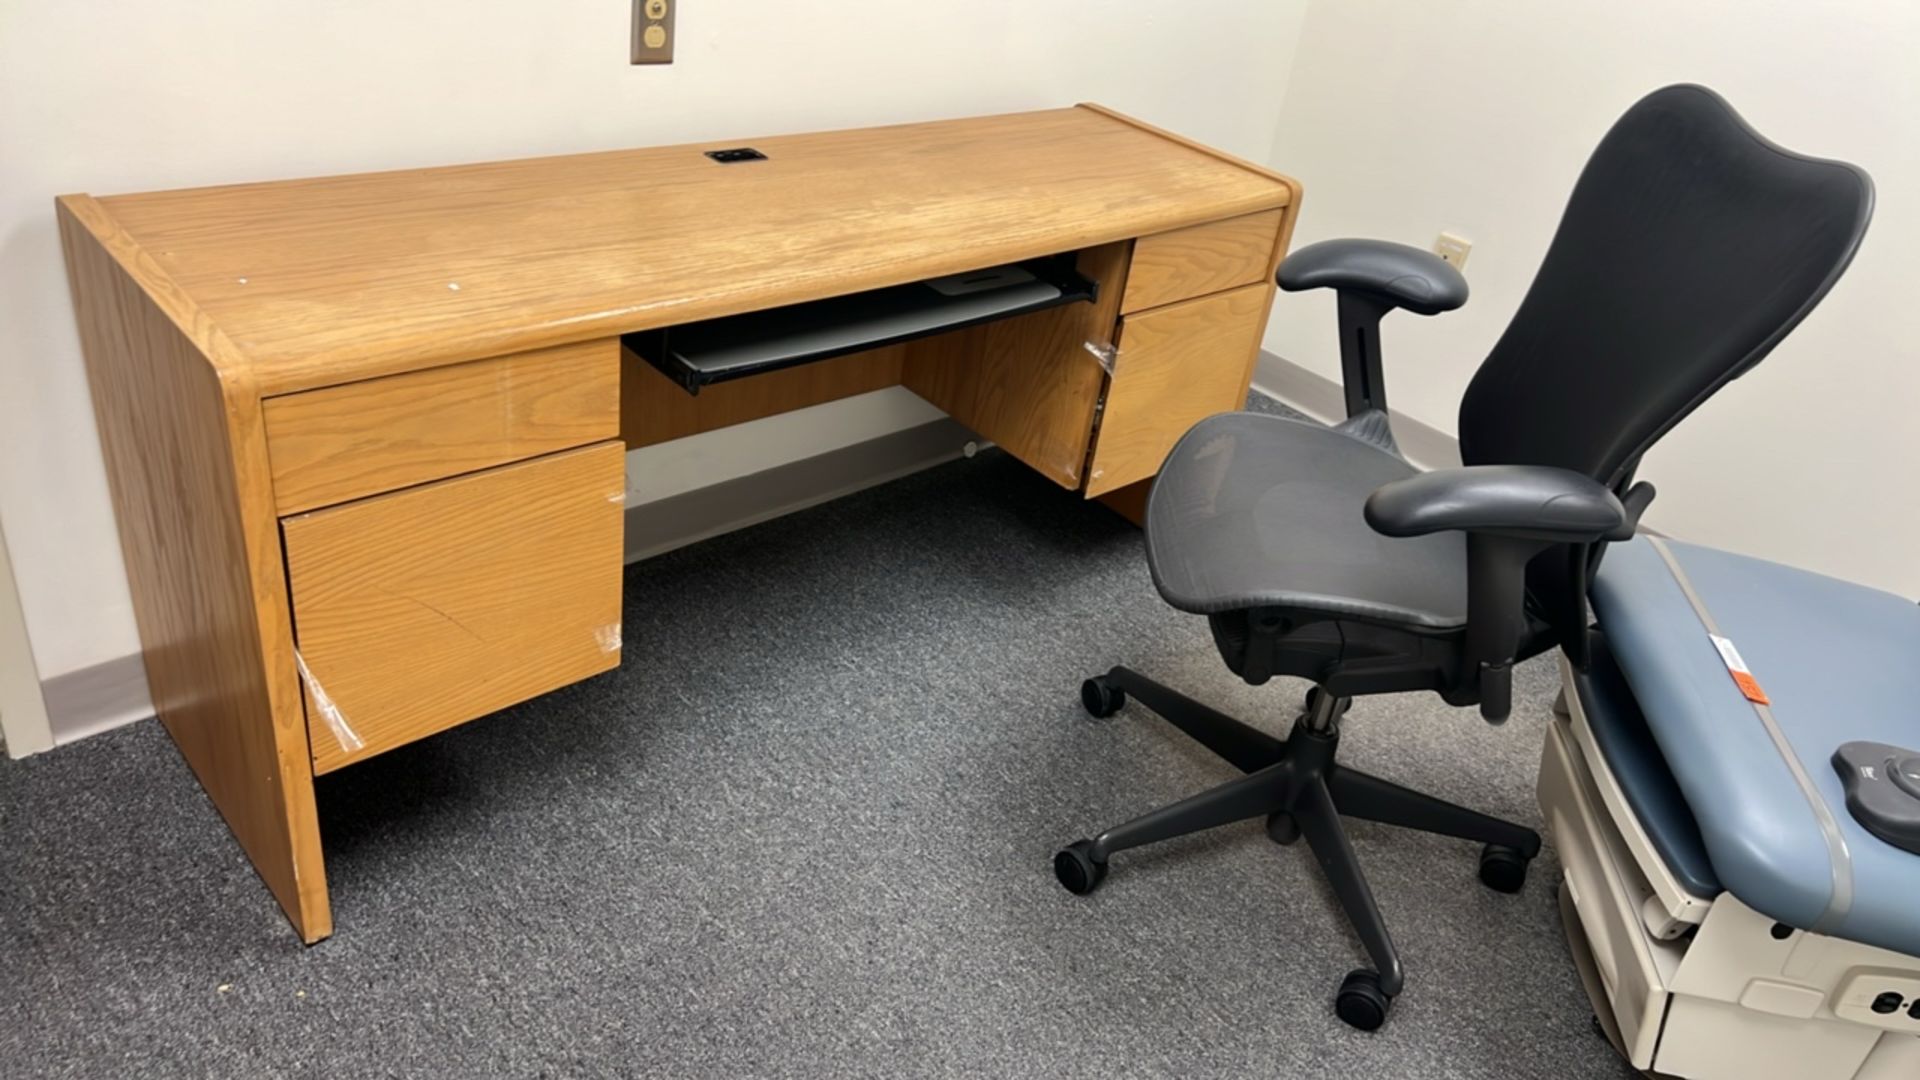 OFFICE TO INCLUDE: DESKS, CHAIRS, PHONE, FILE CABINET, WHITE BOARD - Bild 5 aus 6